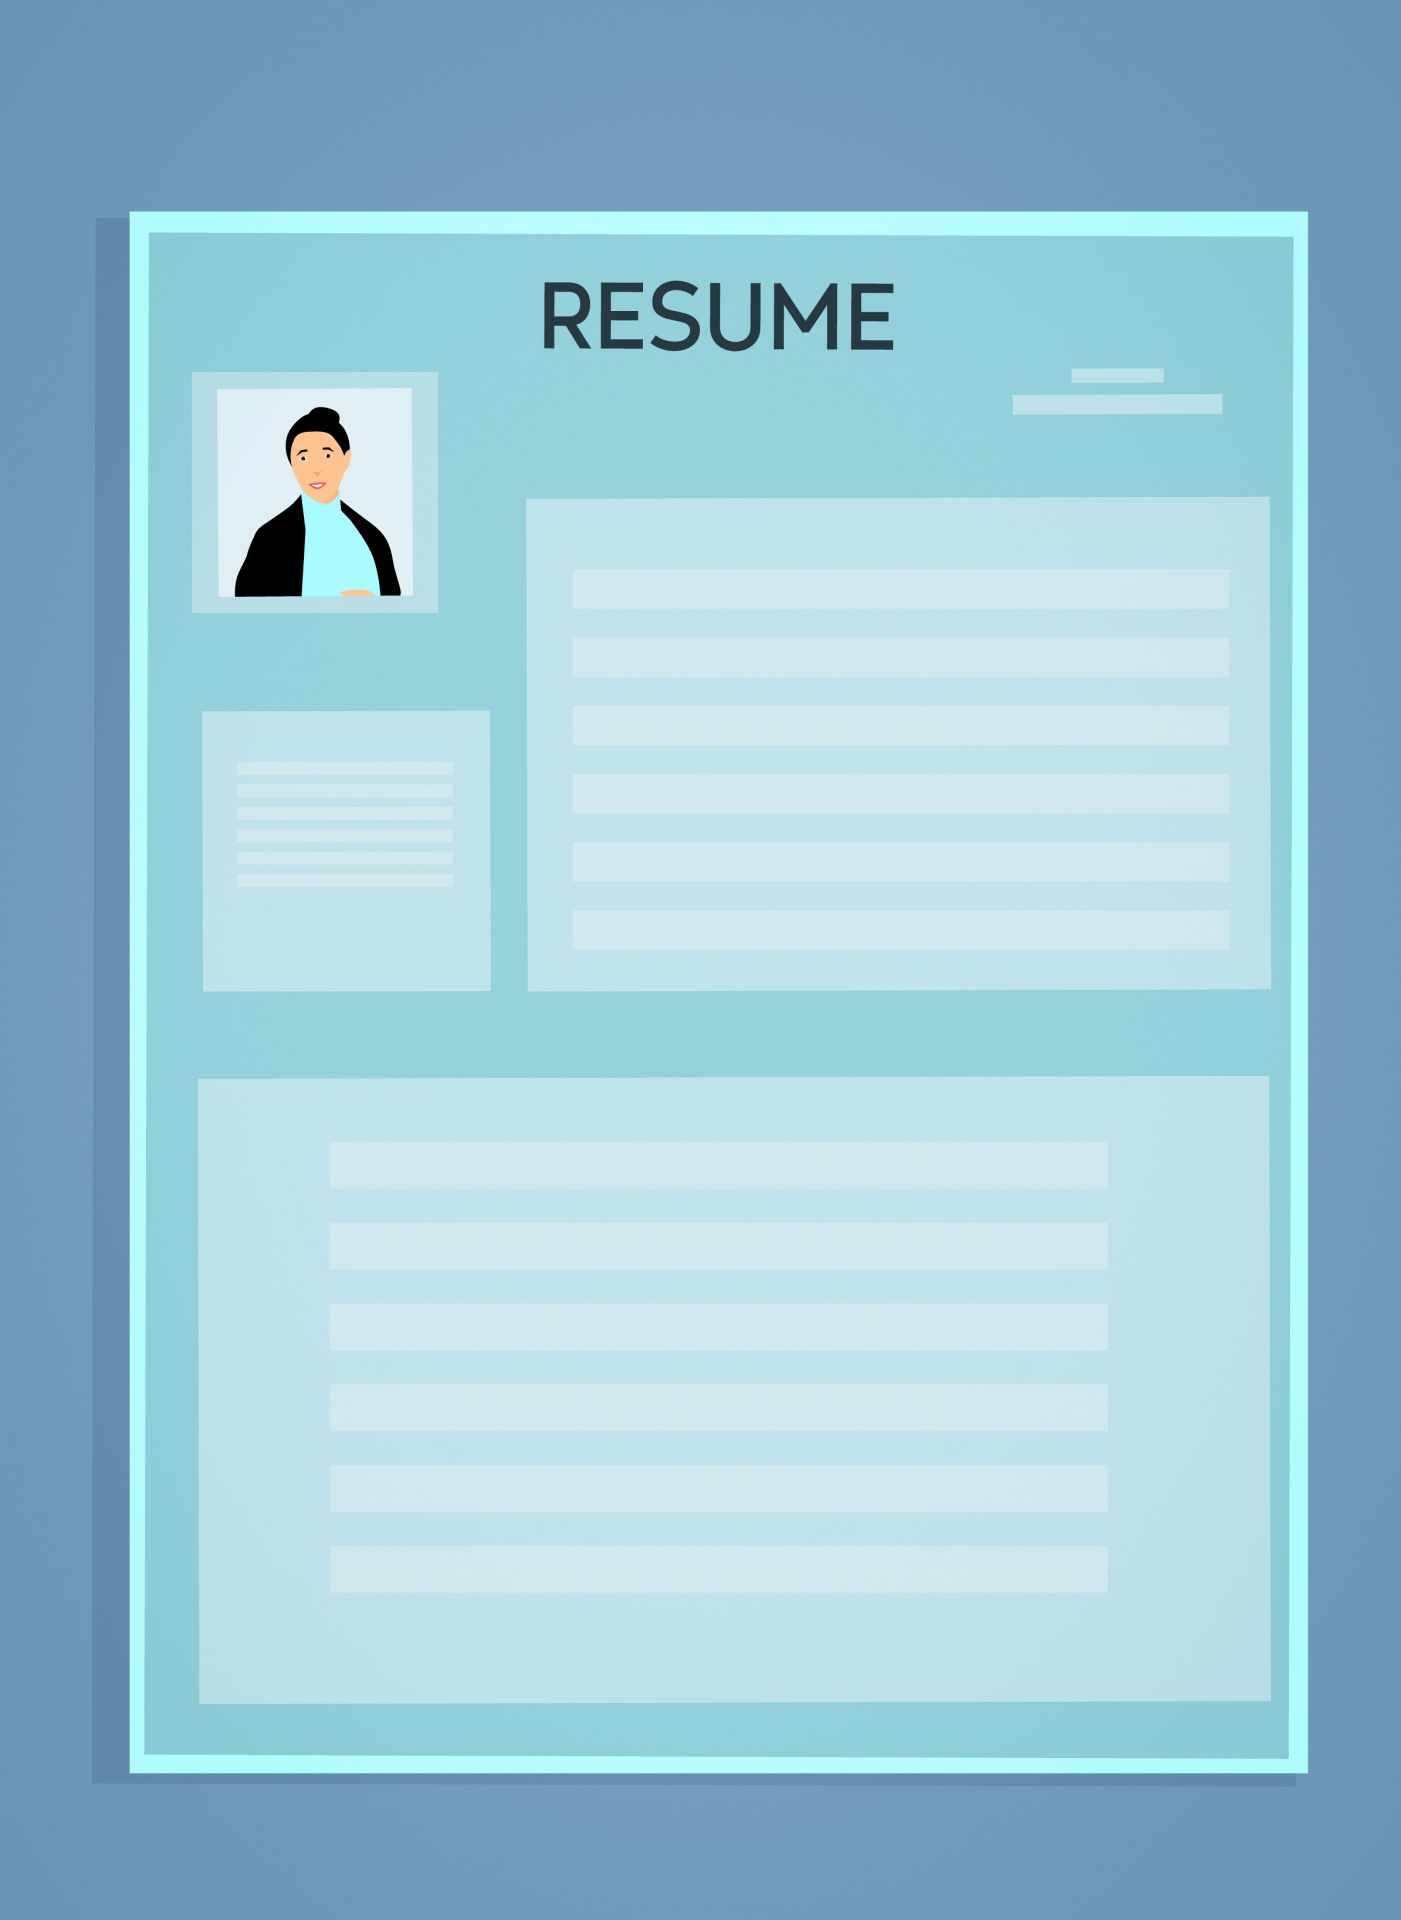 resume ,cv , resume template, application ,apply ,business ,charts ,clean, corporate, document, employ ,employee ,employer, employment ,experience, finance ,graphs , header ,hiring , interview, job, layout, light, office, paper, paragraph ,print ,